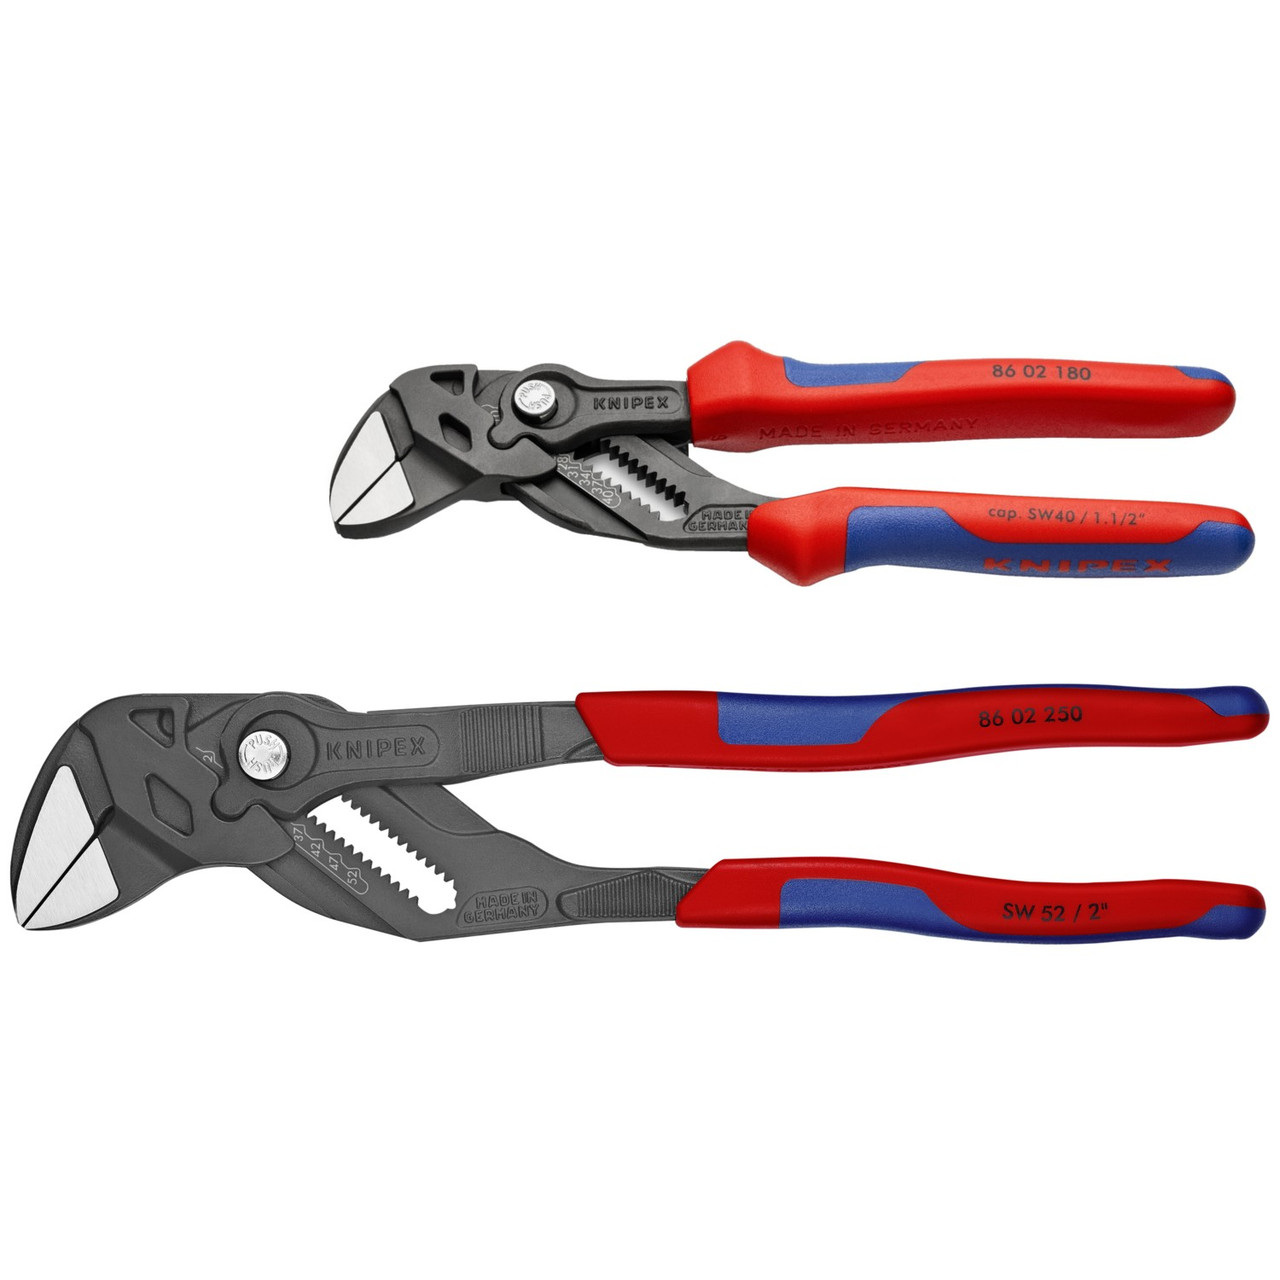 Knipex Adjustable Pliers Wrench Set 7 & 10 Comfort Grip Handles Black  Finish